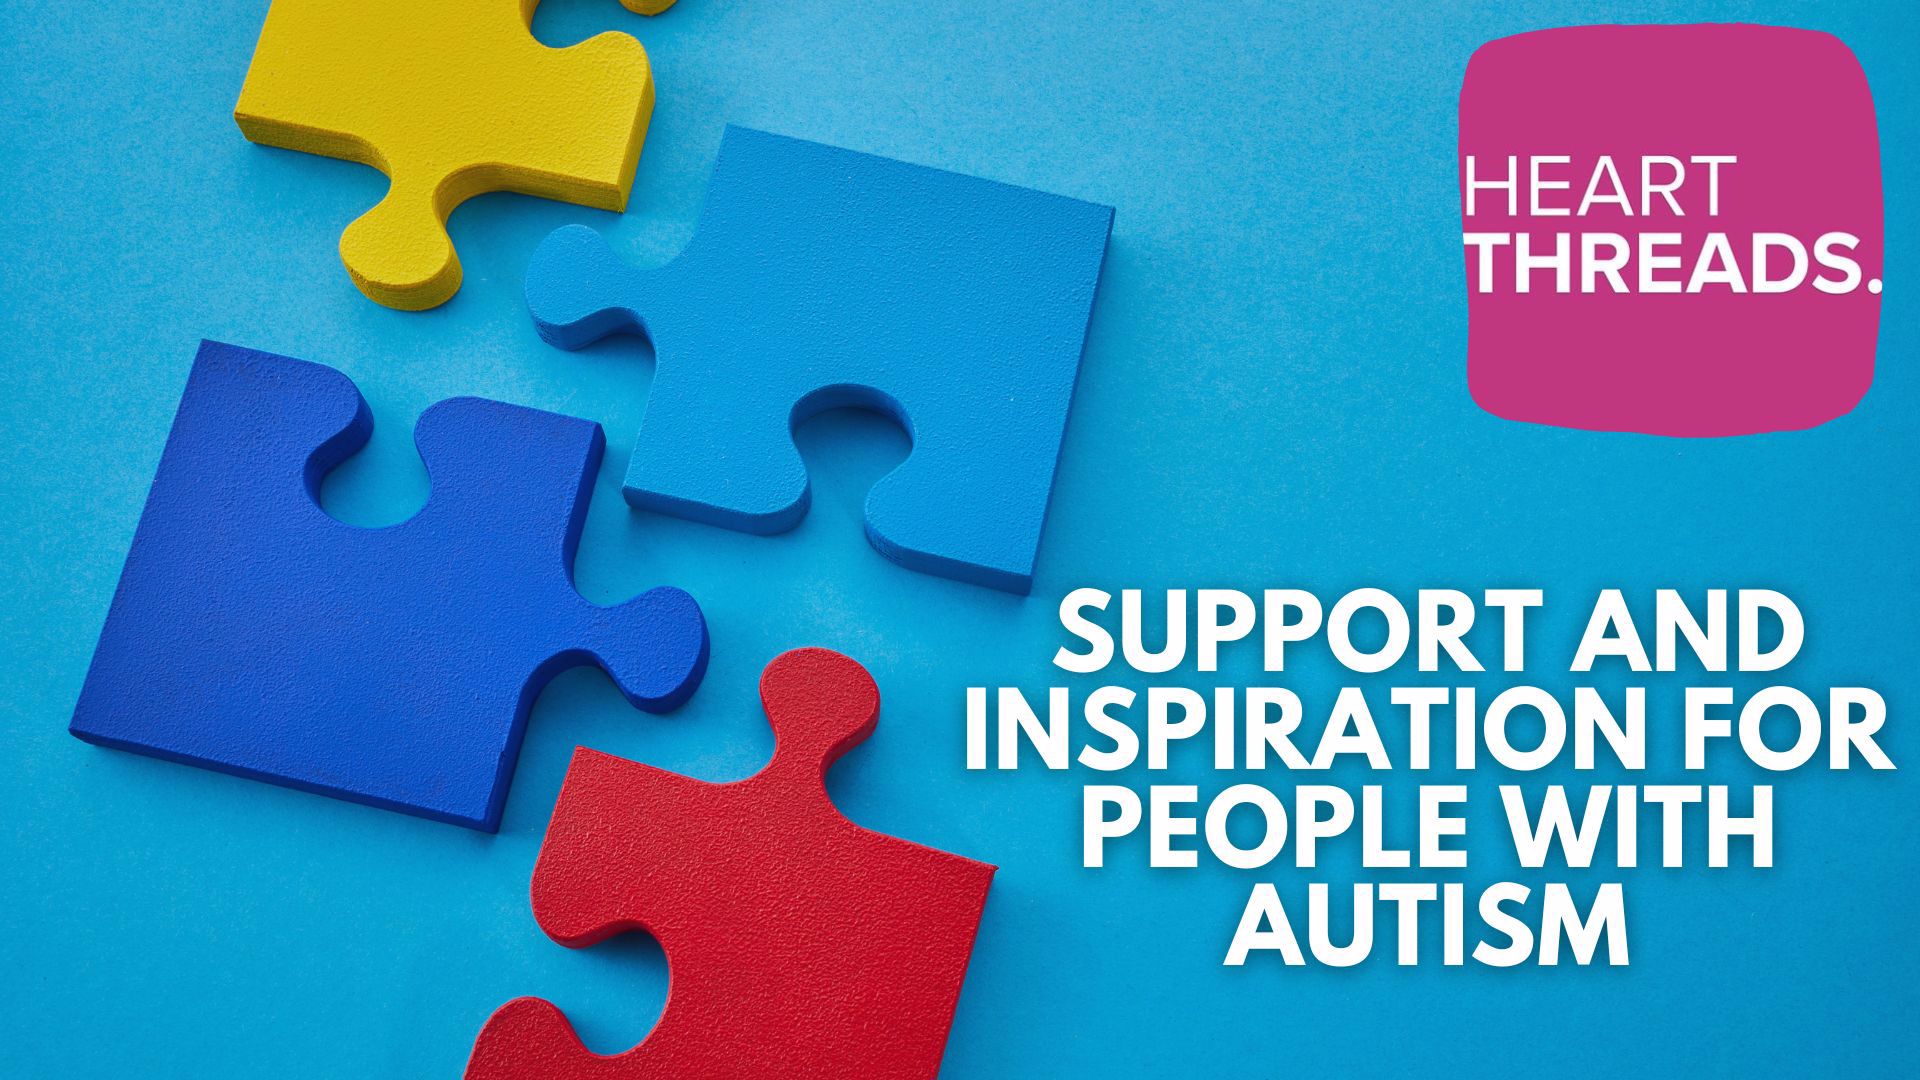 A collection of heartwarming stories focusing on the support and inspiration for people living with autism, as well as ways others are learning and helping.